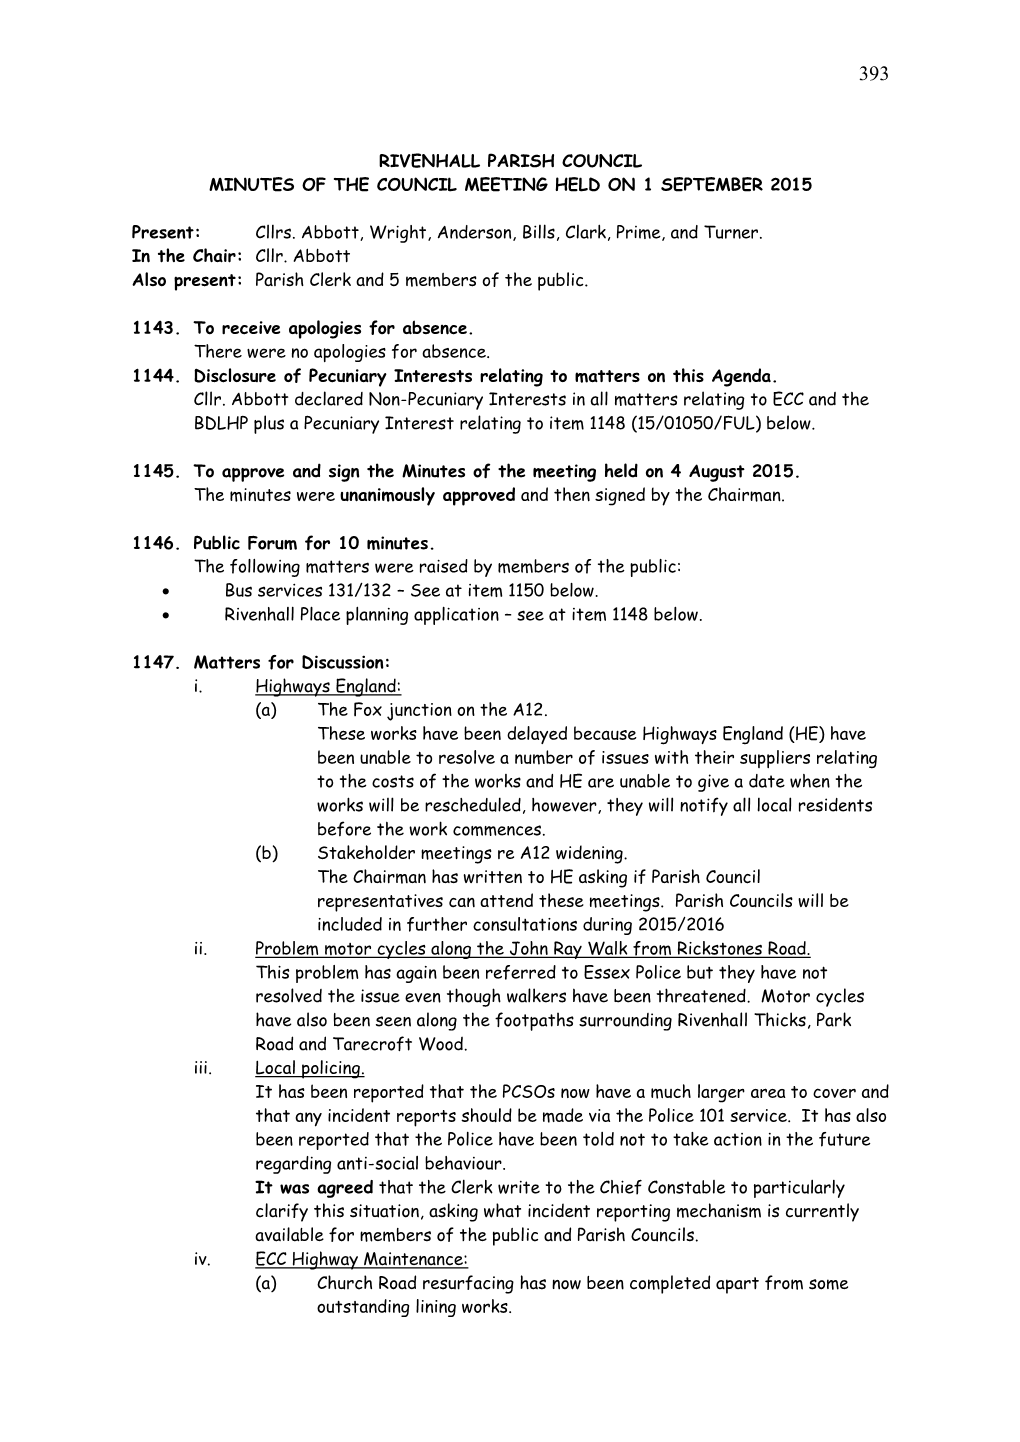 Rivenhall Parish Council Minutes of the Council Meeting Held on 1 September 2015